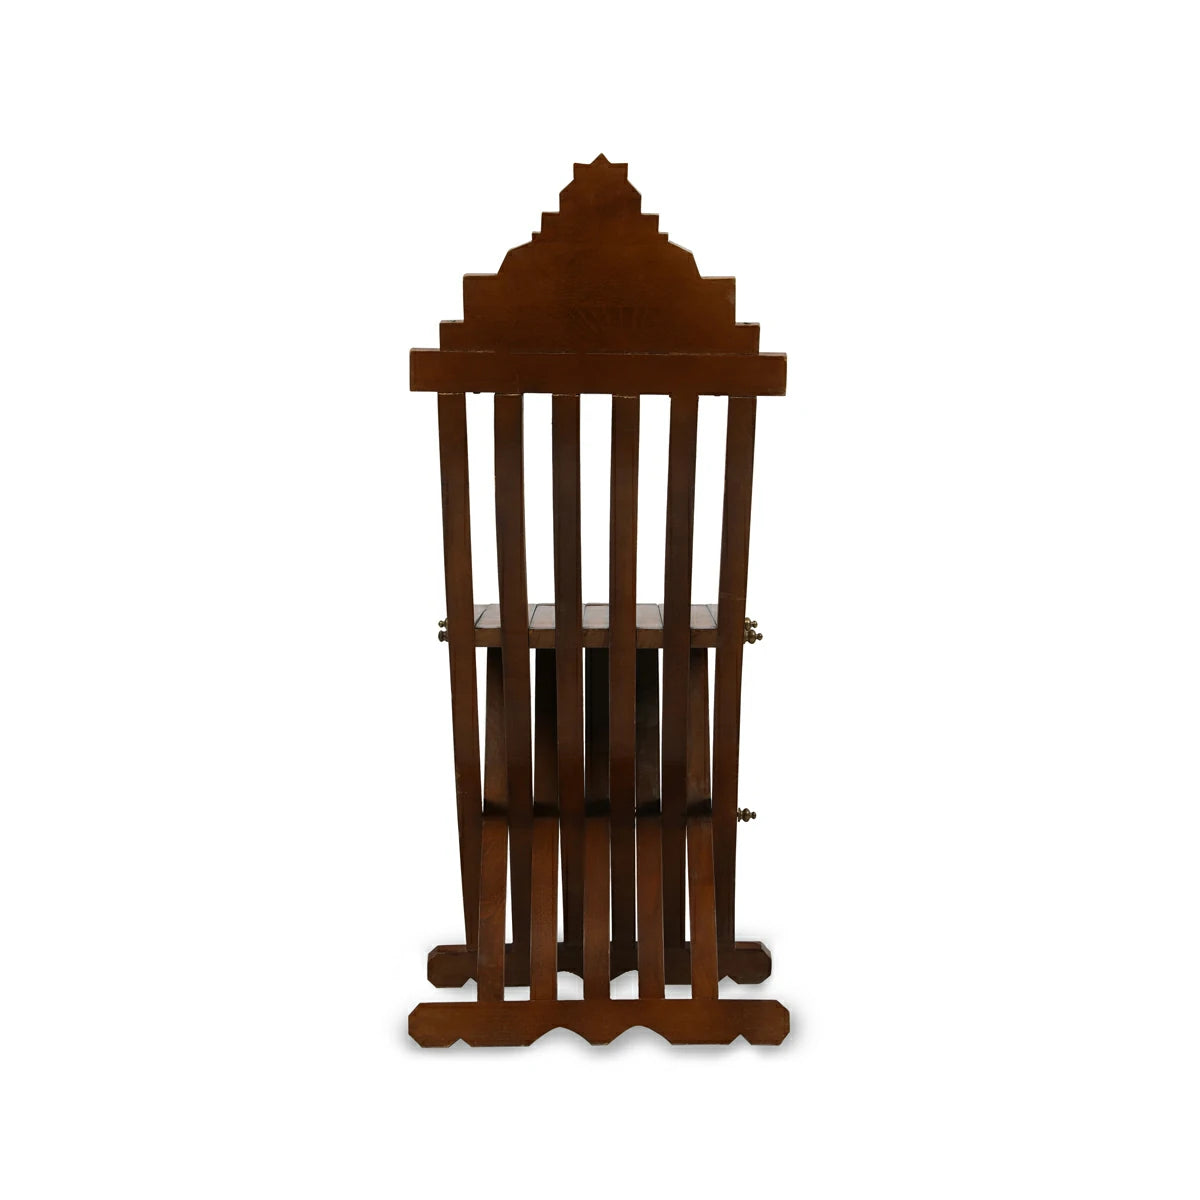 Back View of Foldable Arabian Flat Top Wooden Chair